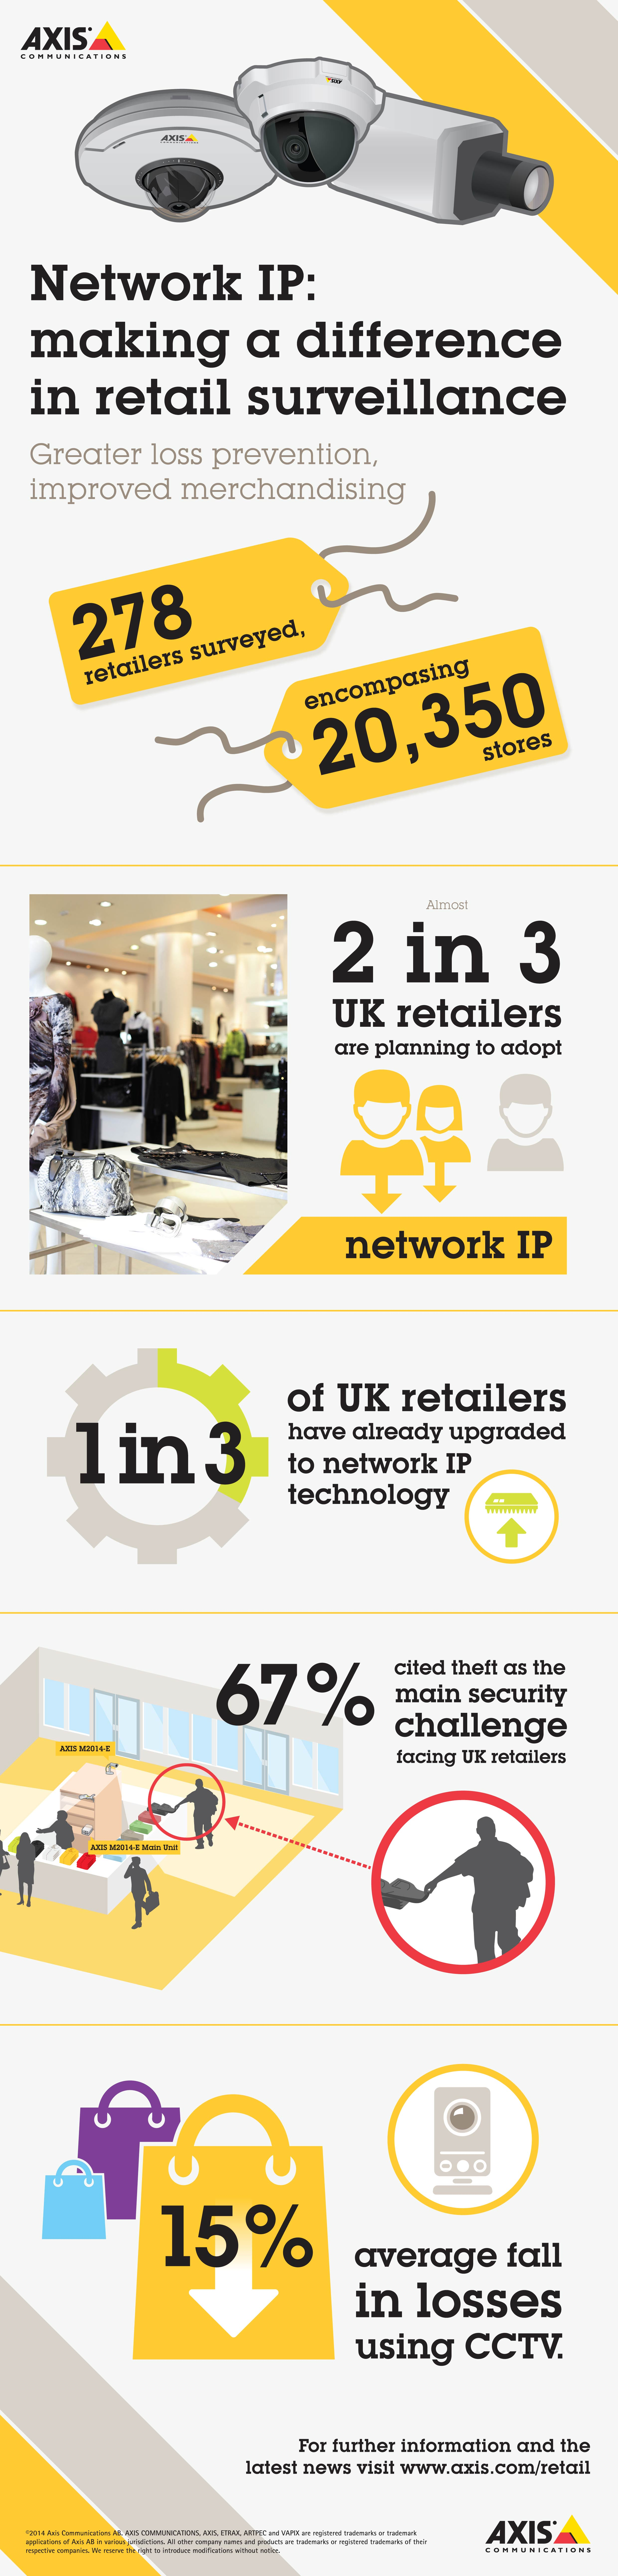 axis_retail_infographic-1_v3